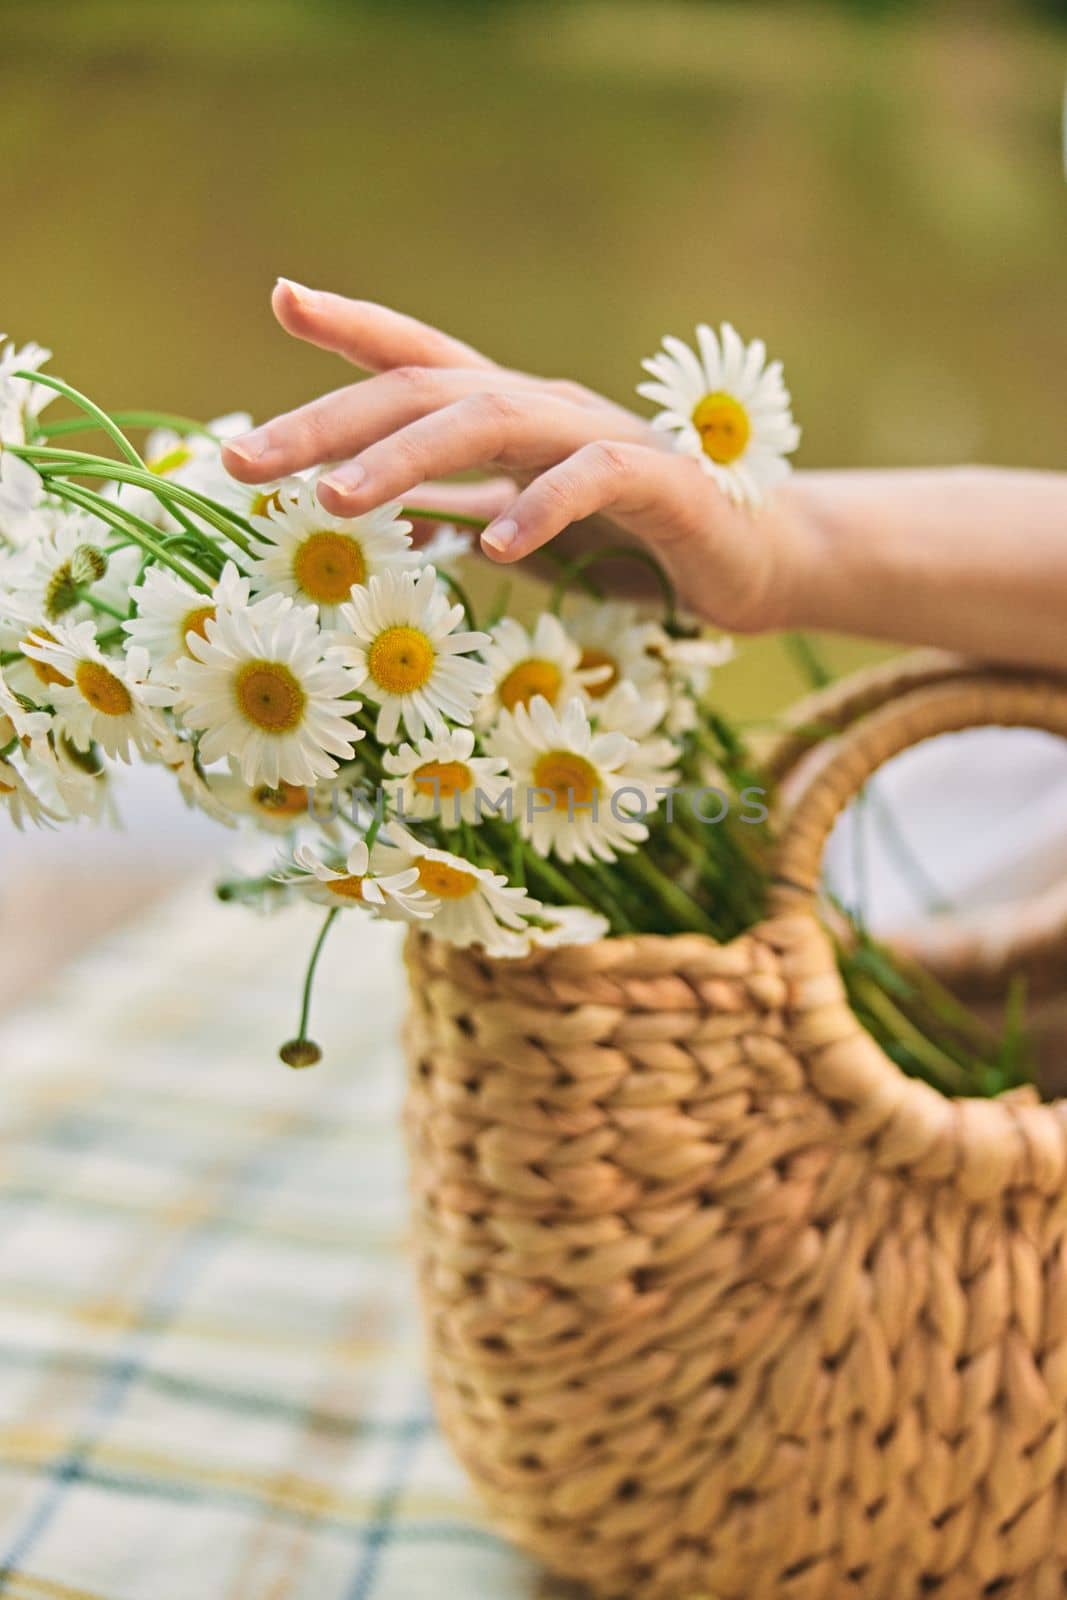 close up photo of a woman's hands with a wicker bag full of chamomile flowers. High quality photo